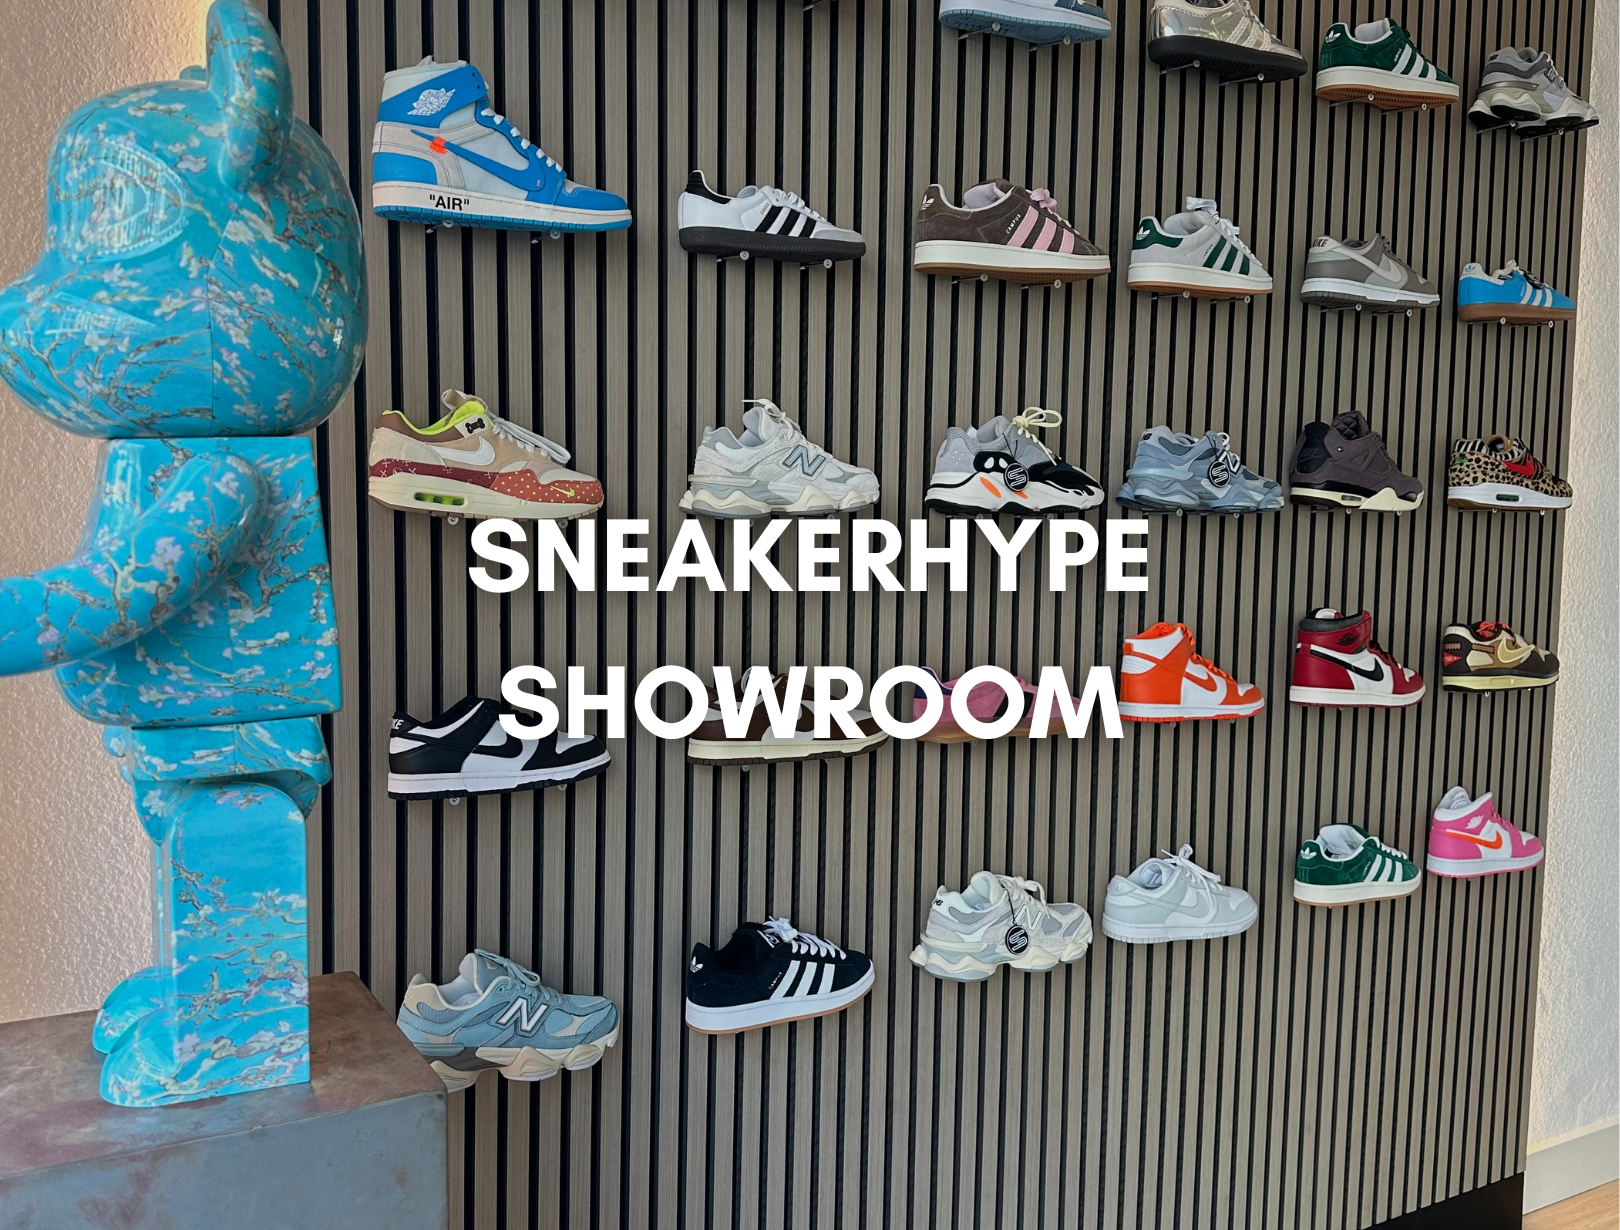 This Is How I Afford Hype Sneakers | Gallery posted by Yin$ane | Lemon8